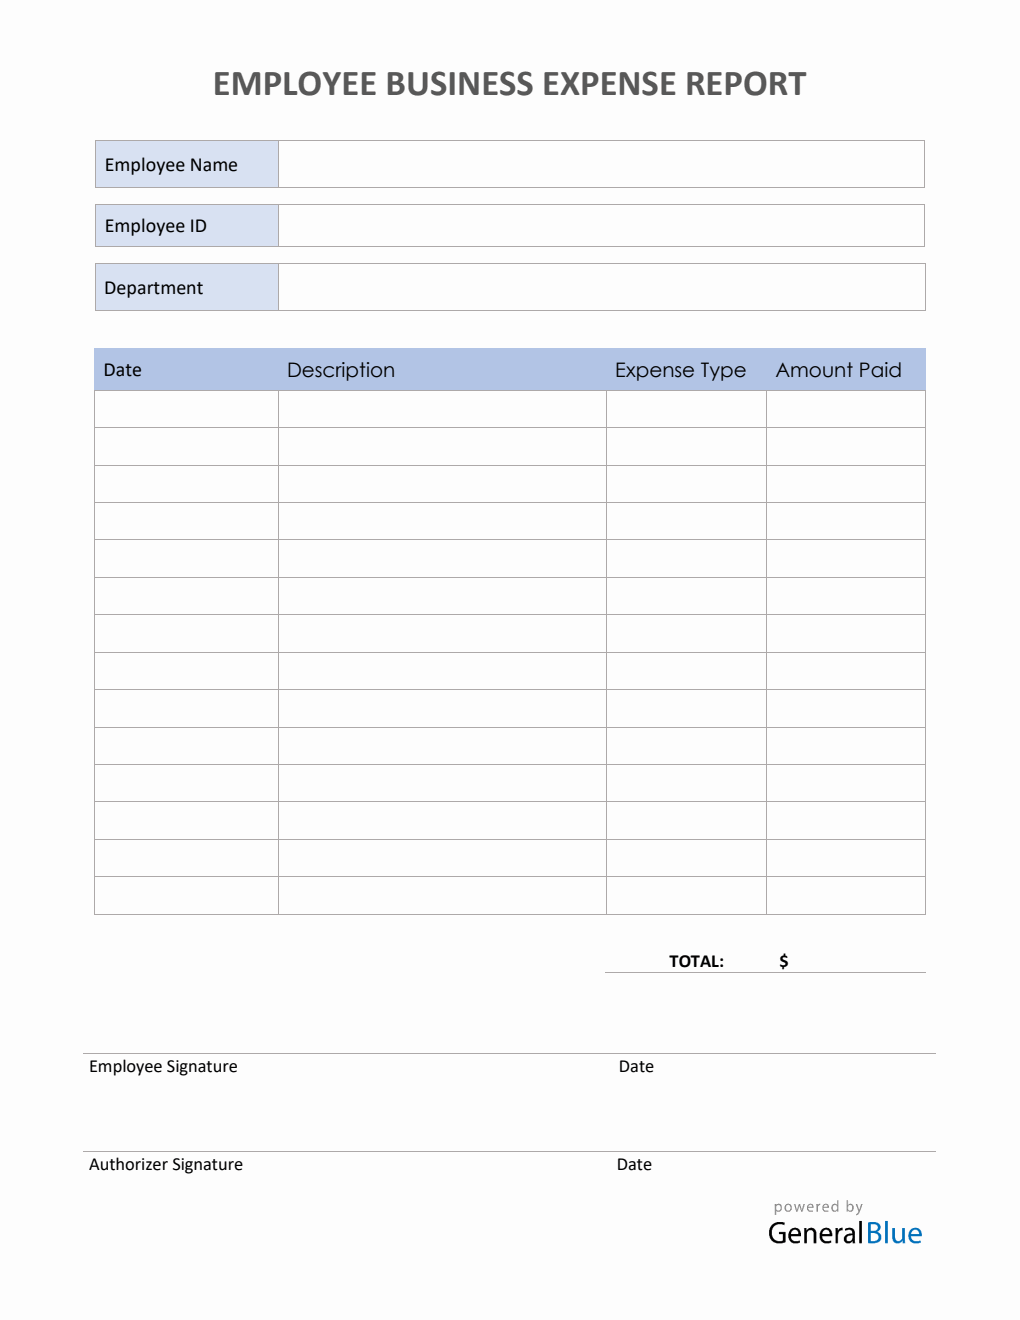 Employee Business Expense Report Template in PDF